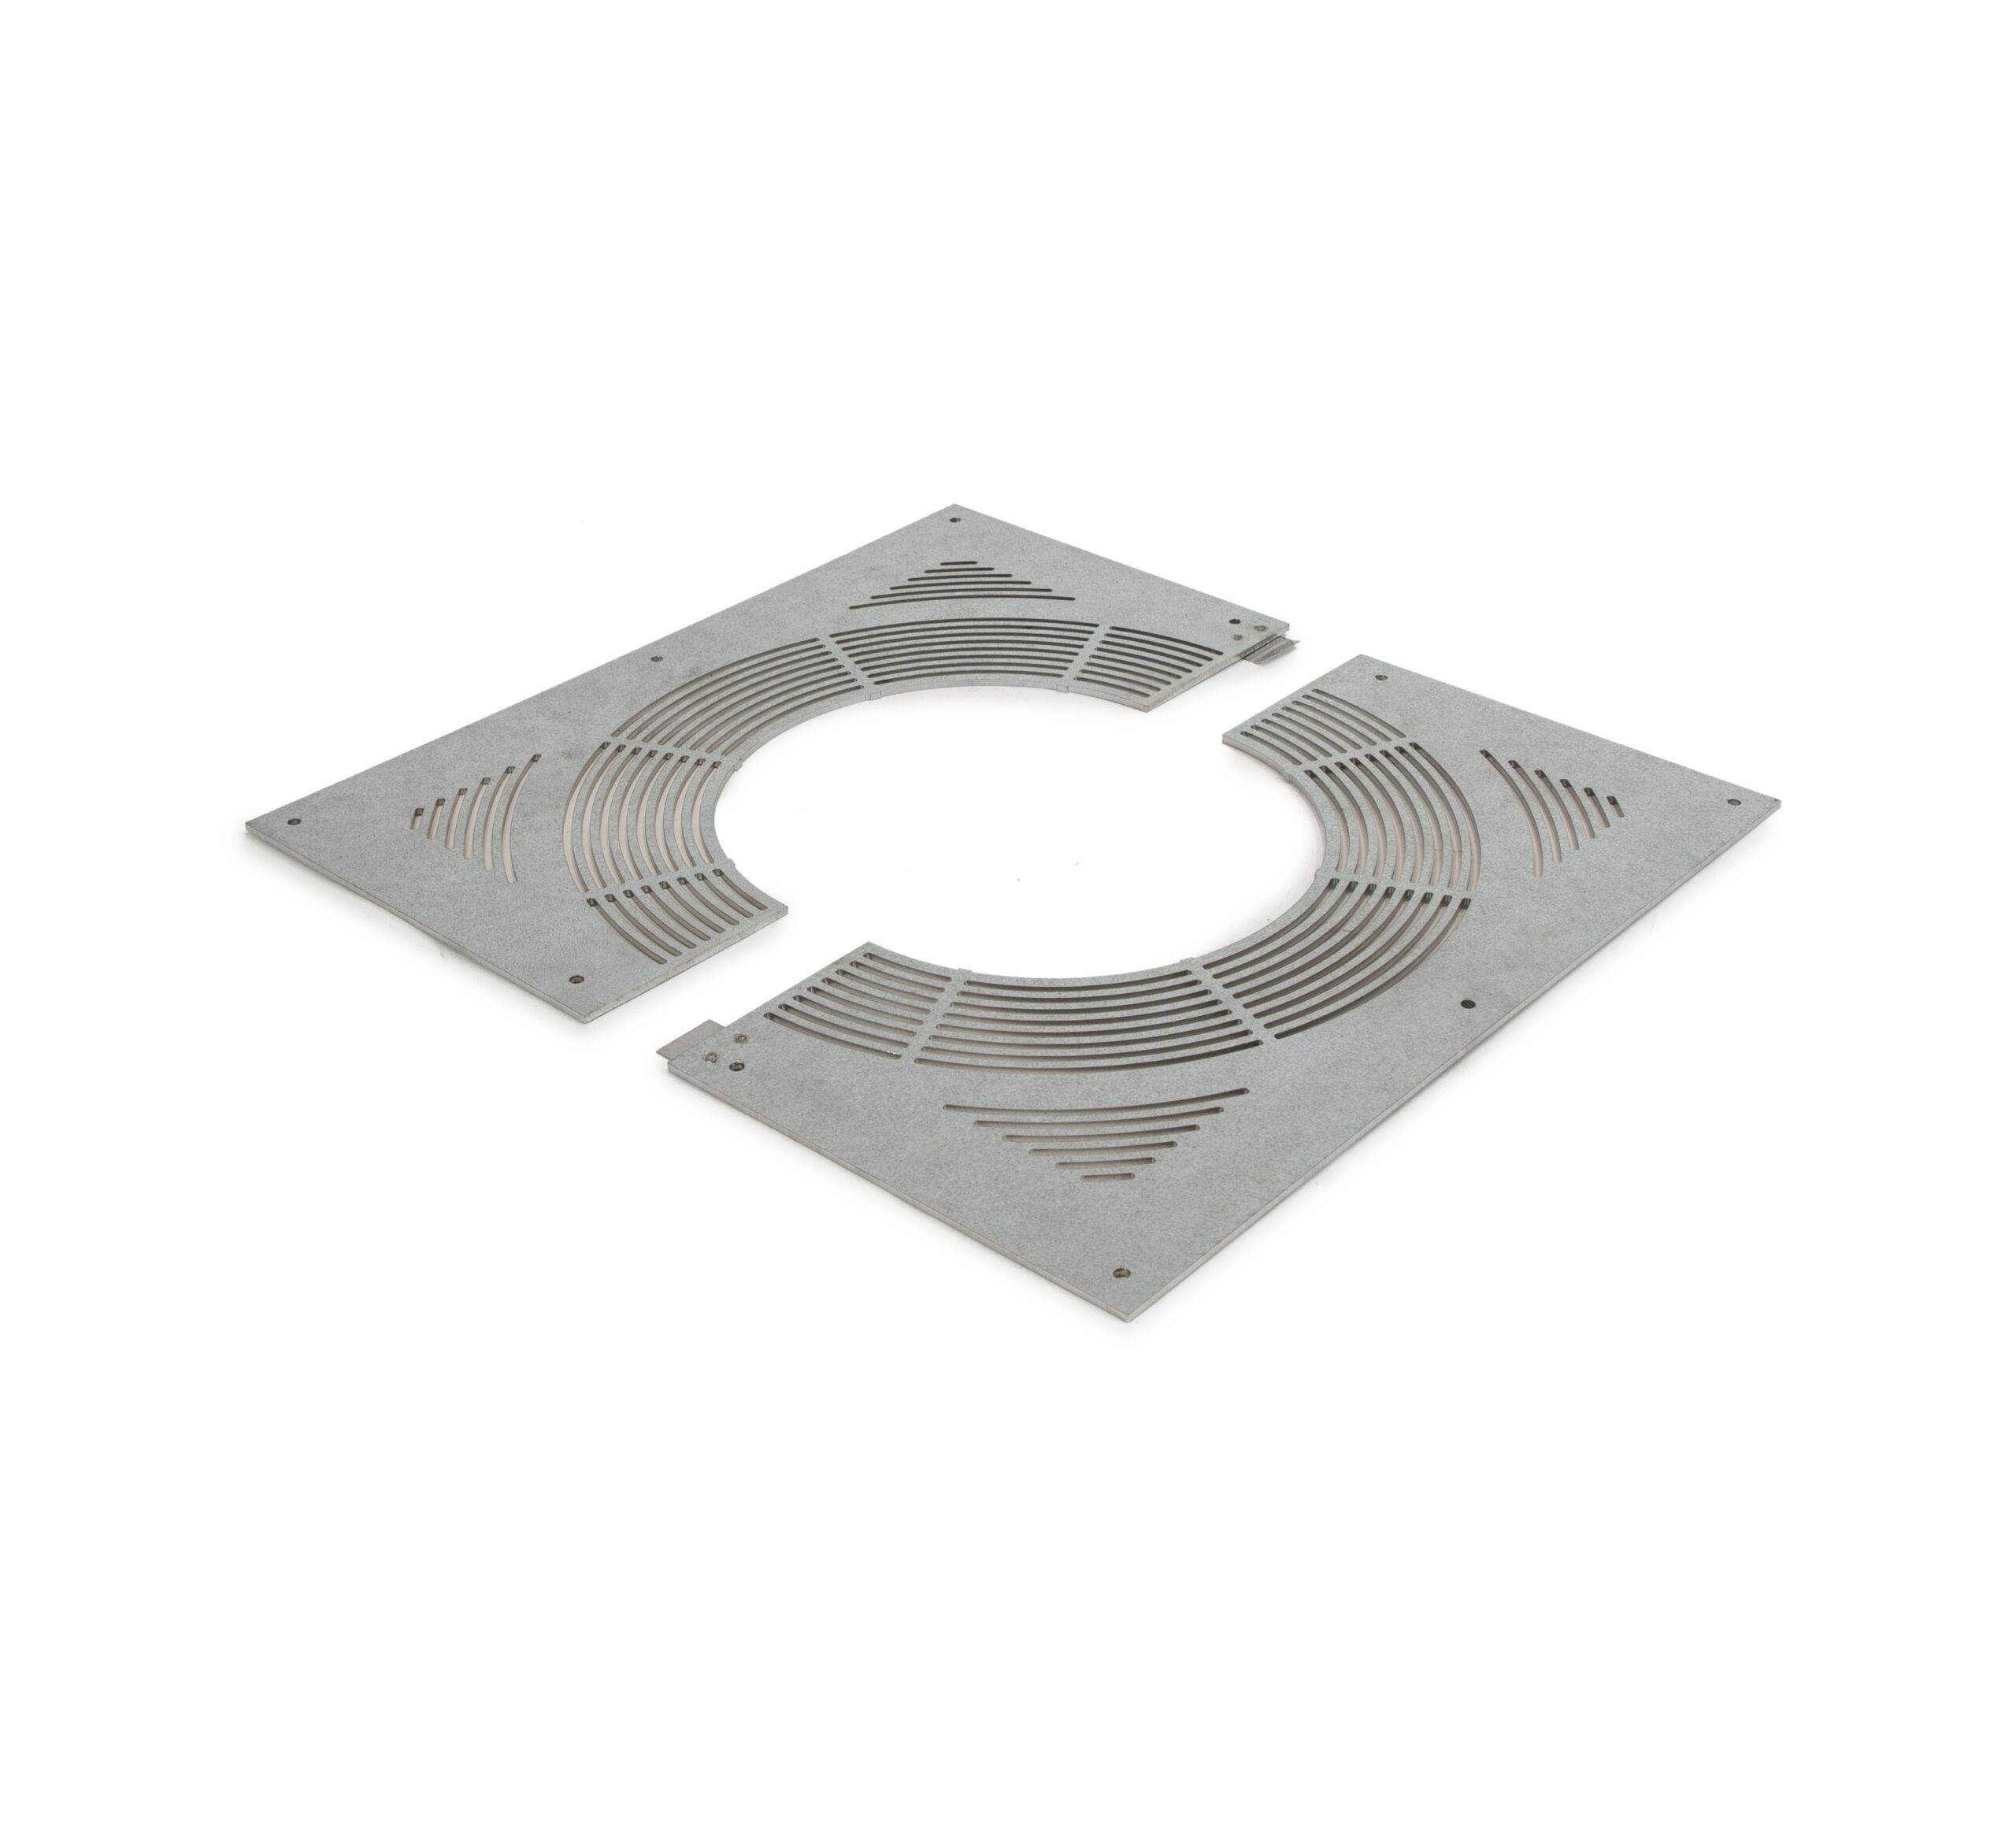 Insulated Chimney System 9425 Firestop plate 2